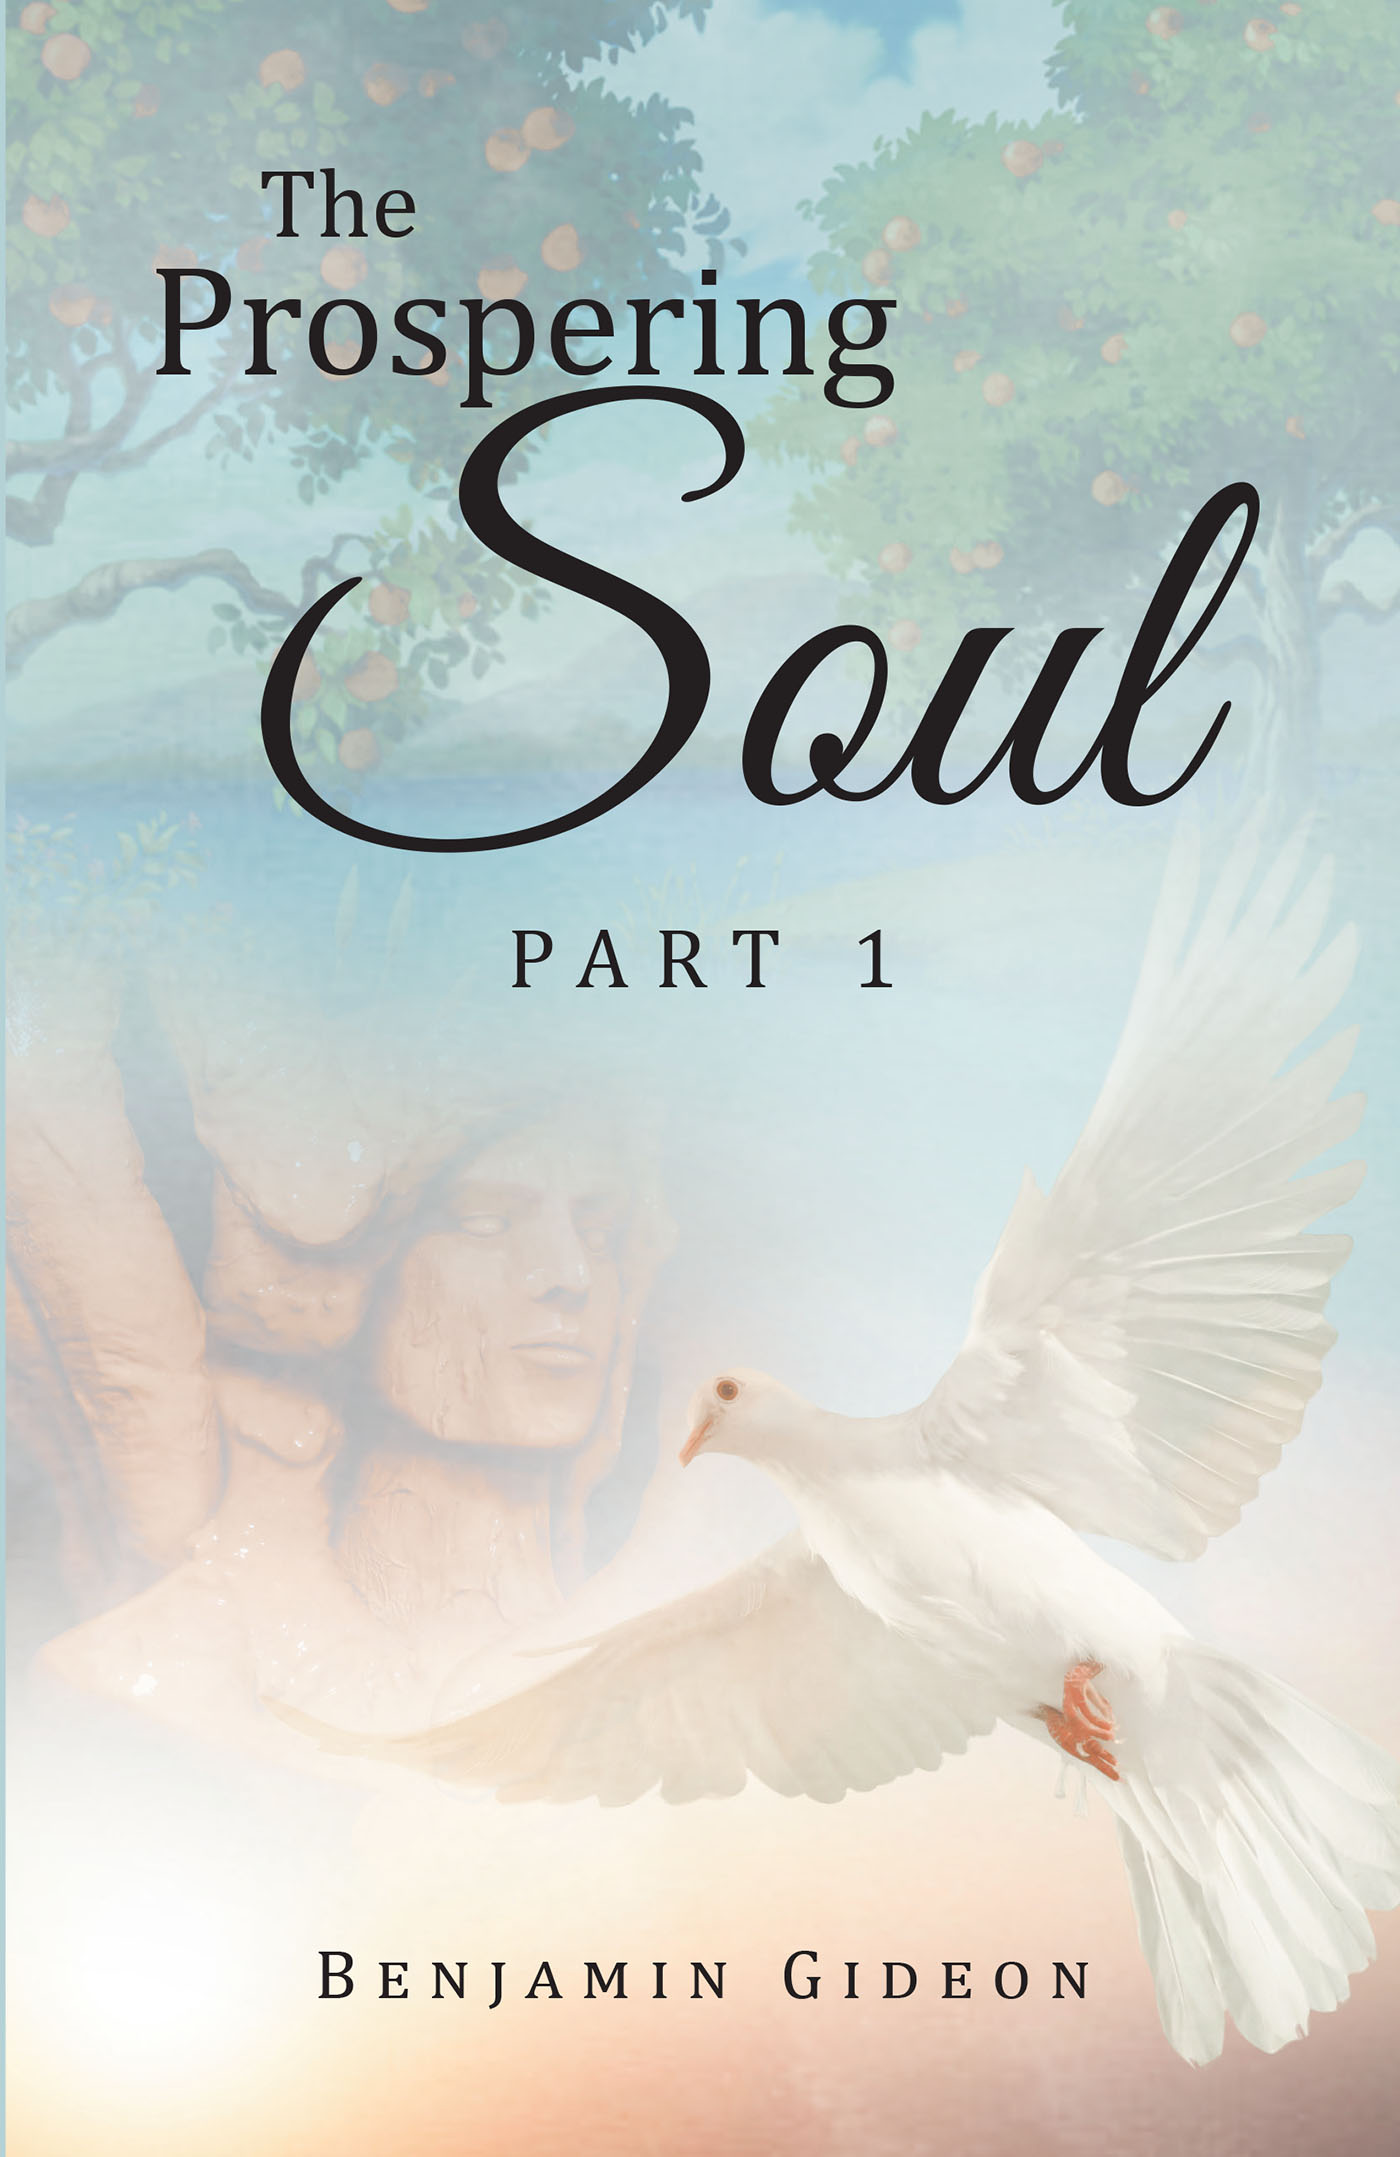 Benjamin Gideon’s Newly Released "The Prospering Soul: Part 1" is a Unique Perspective of How to Grow in All Aspects of Life and Faith